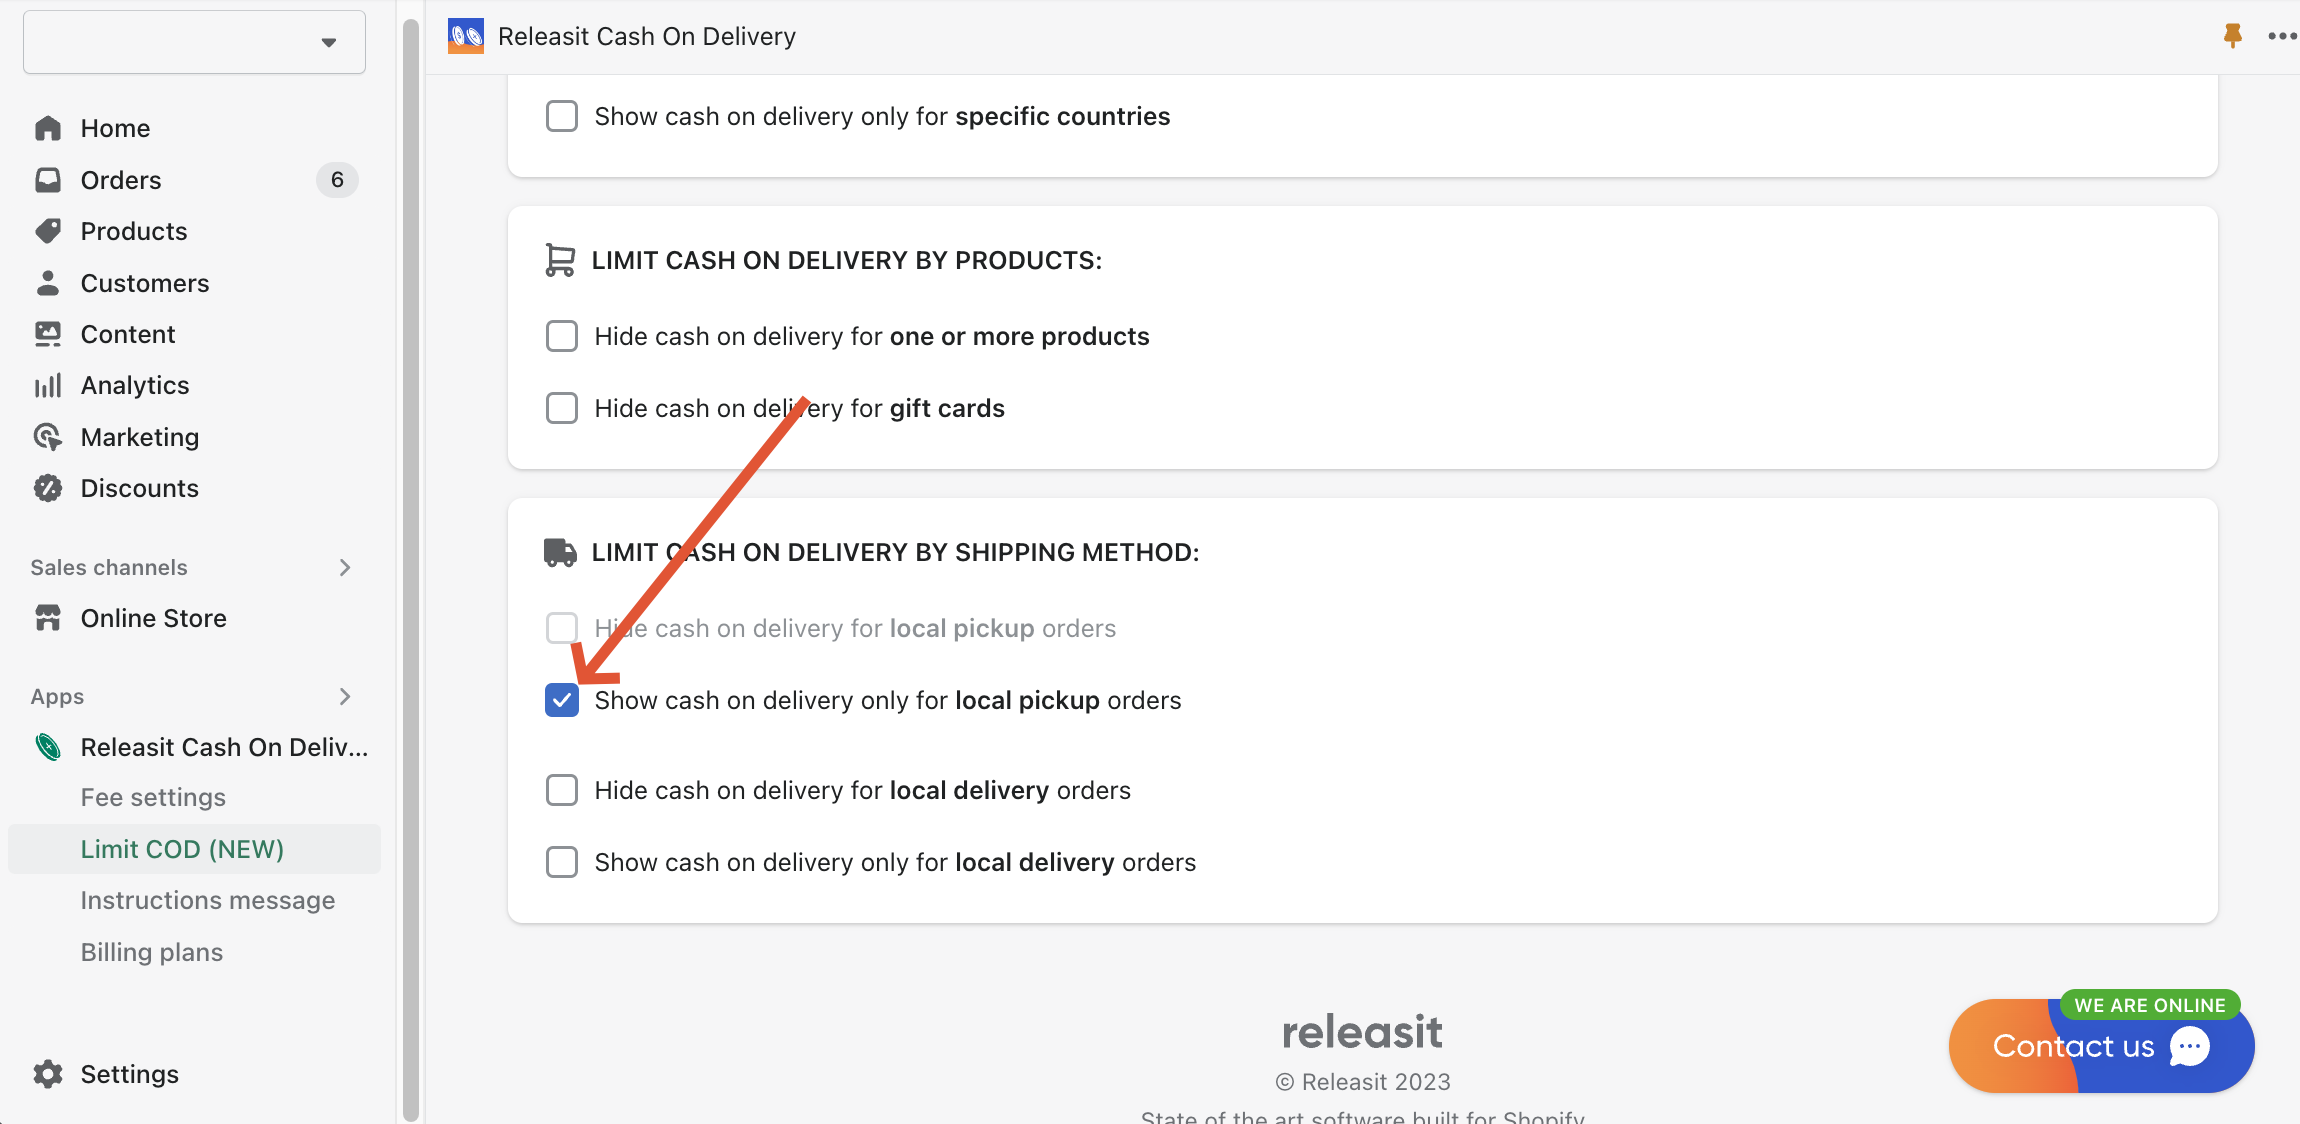 Releasit Cash On Delivery Limit COD page show only for local pickup